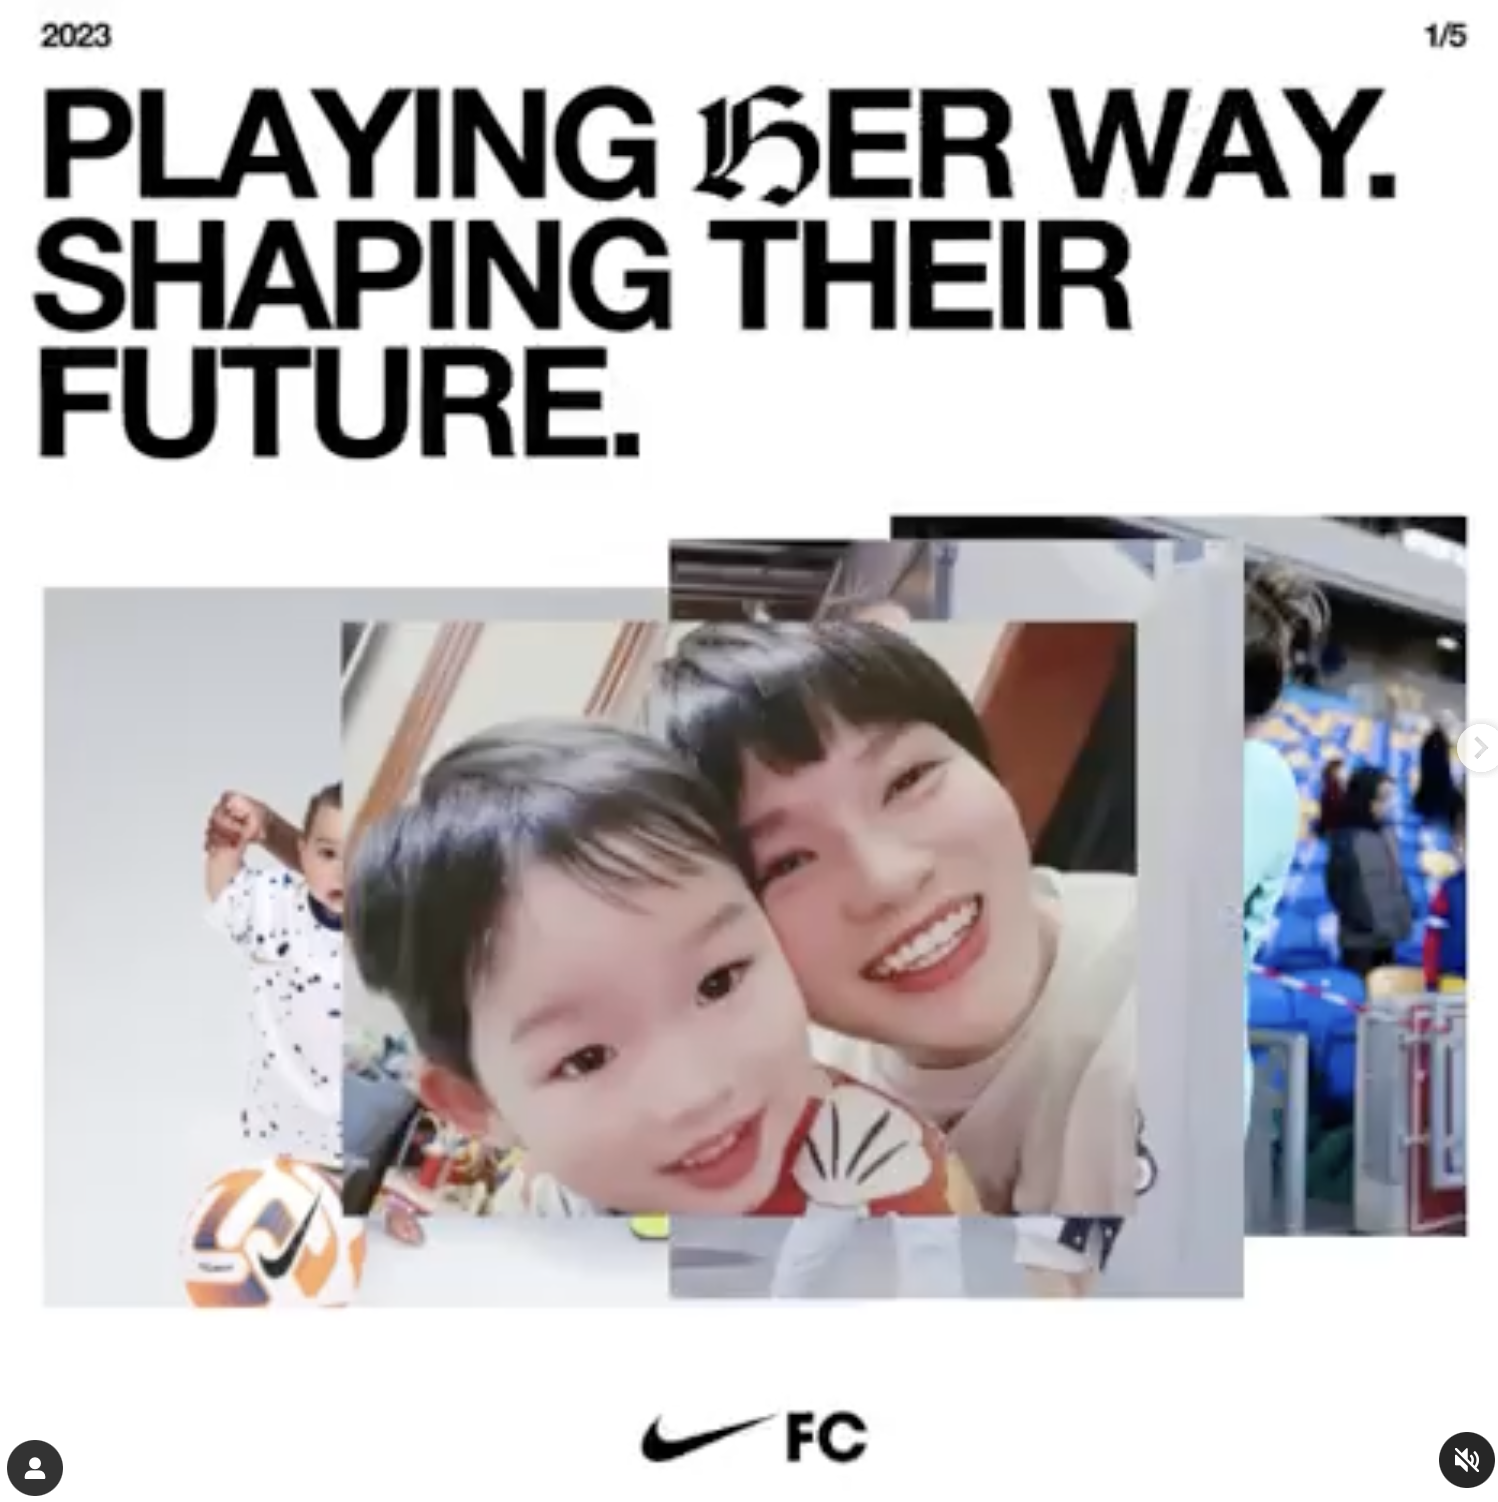 Nike: Telling a Story Through Collages